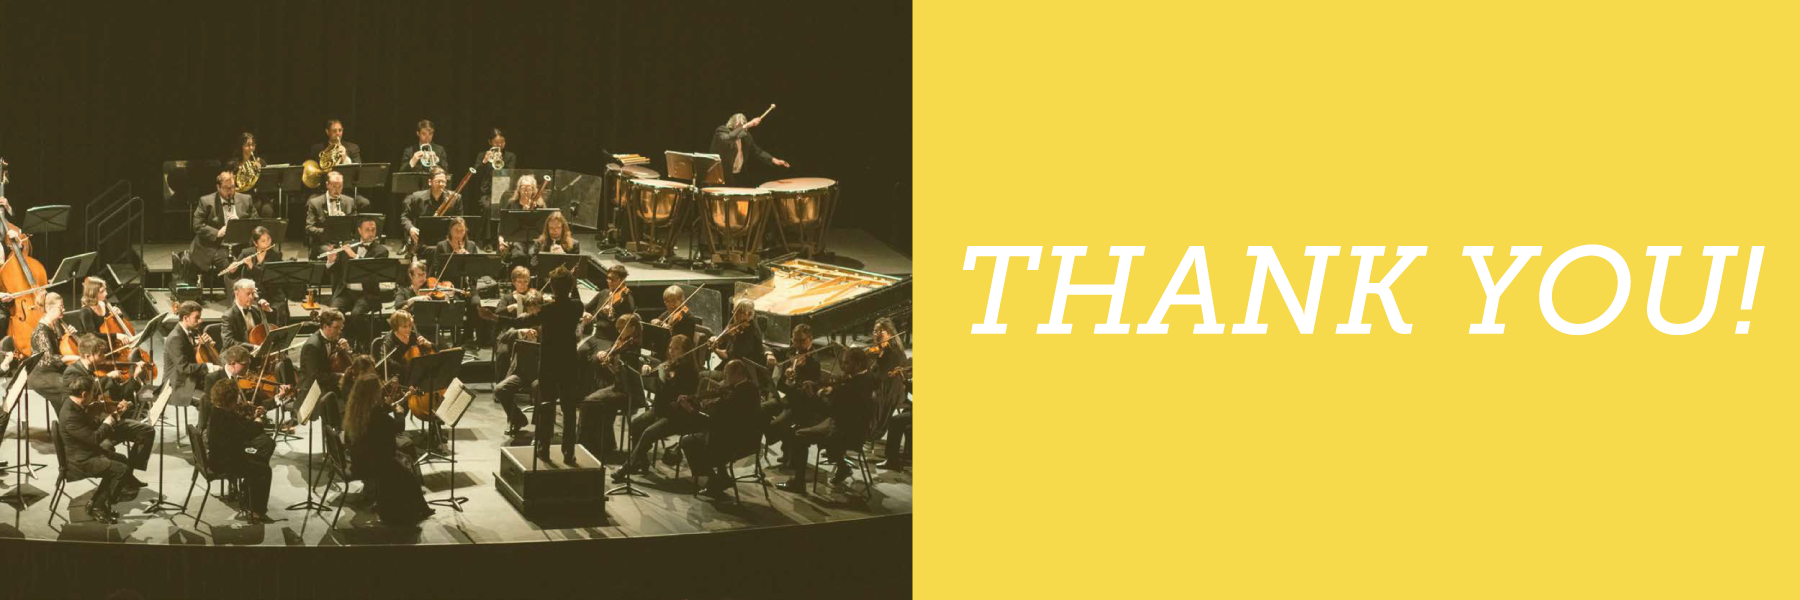 header image for "thank you donors" webpage